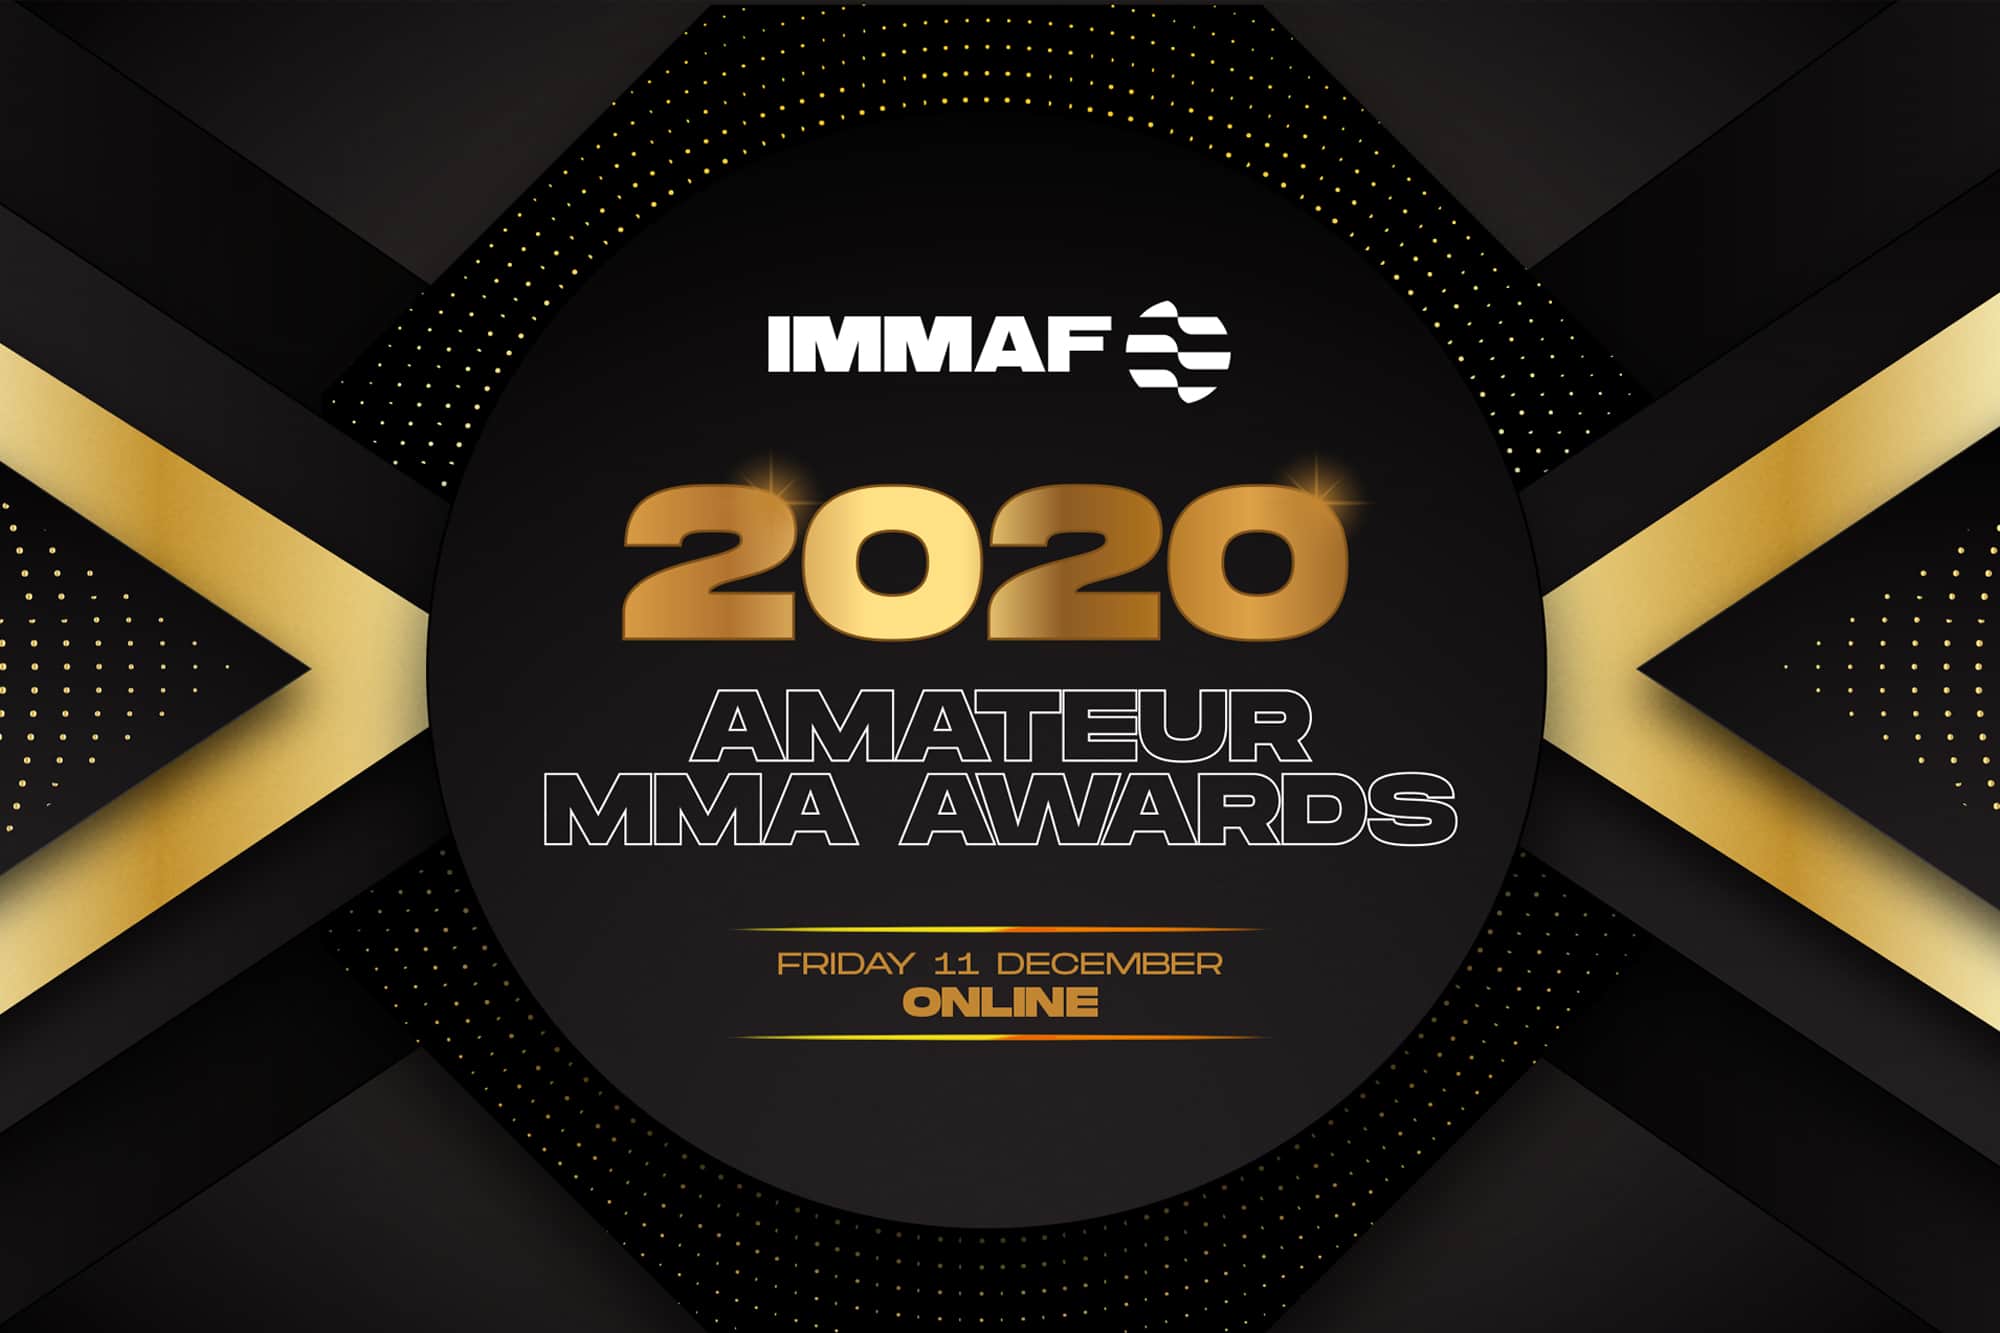 Voting opens for the 2020 Amateur MMA Awards